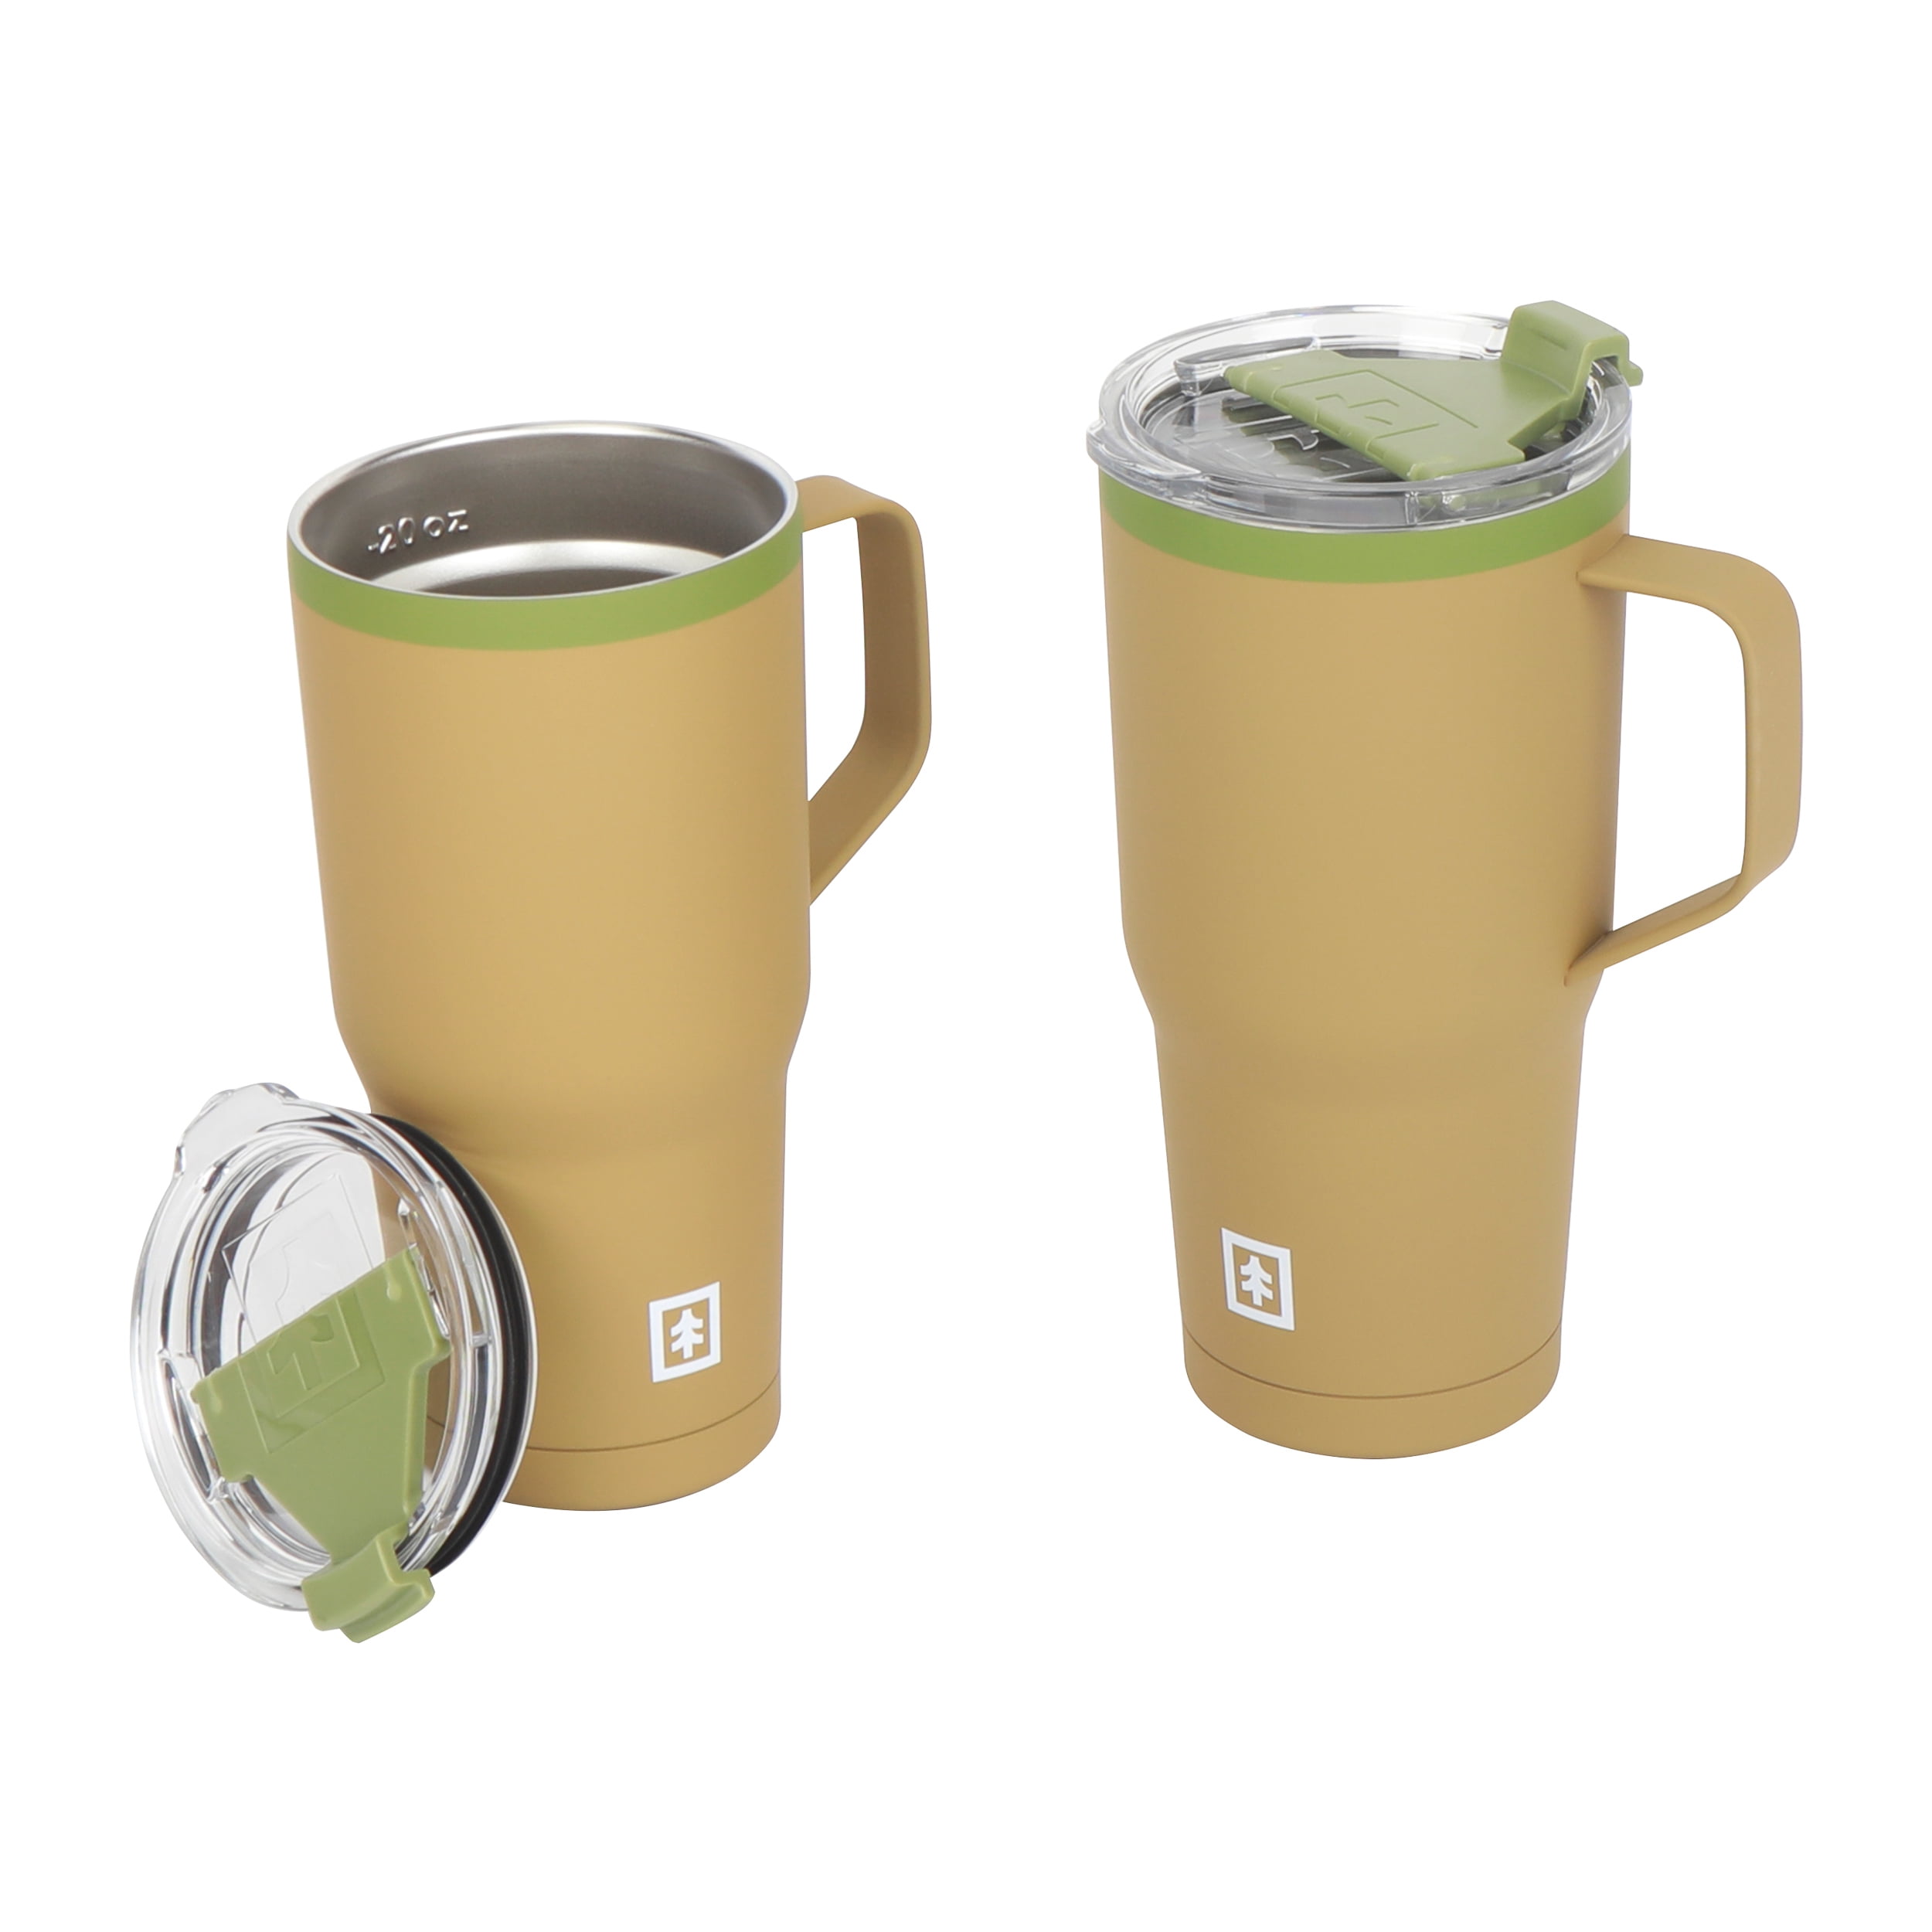 YETI Rambler Travel Mug with Straw Lid Comparison Strong Hold Lid